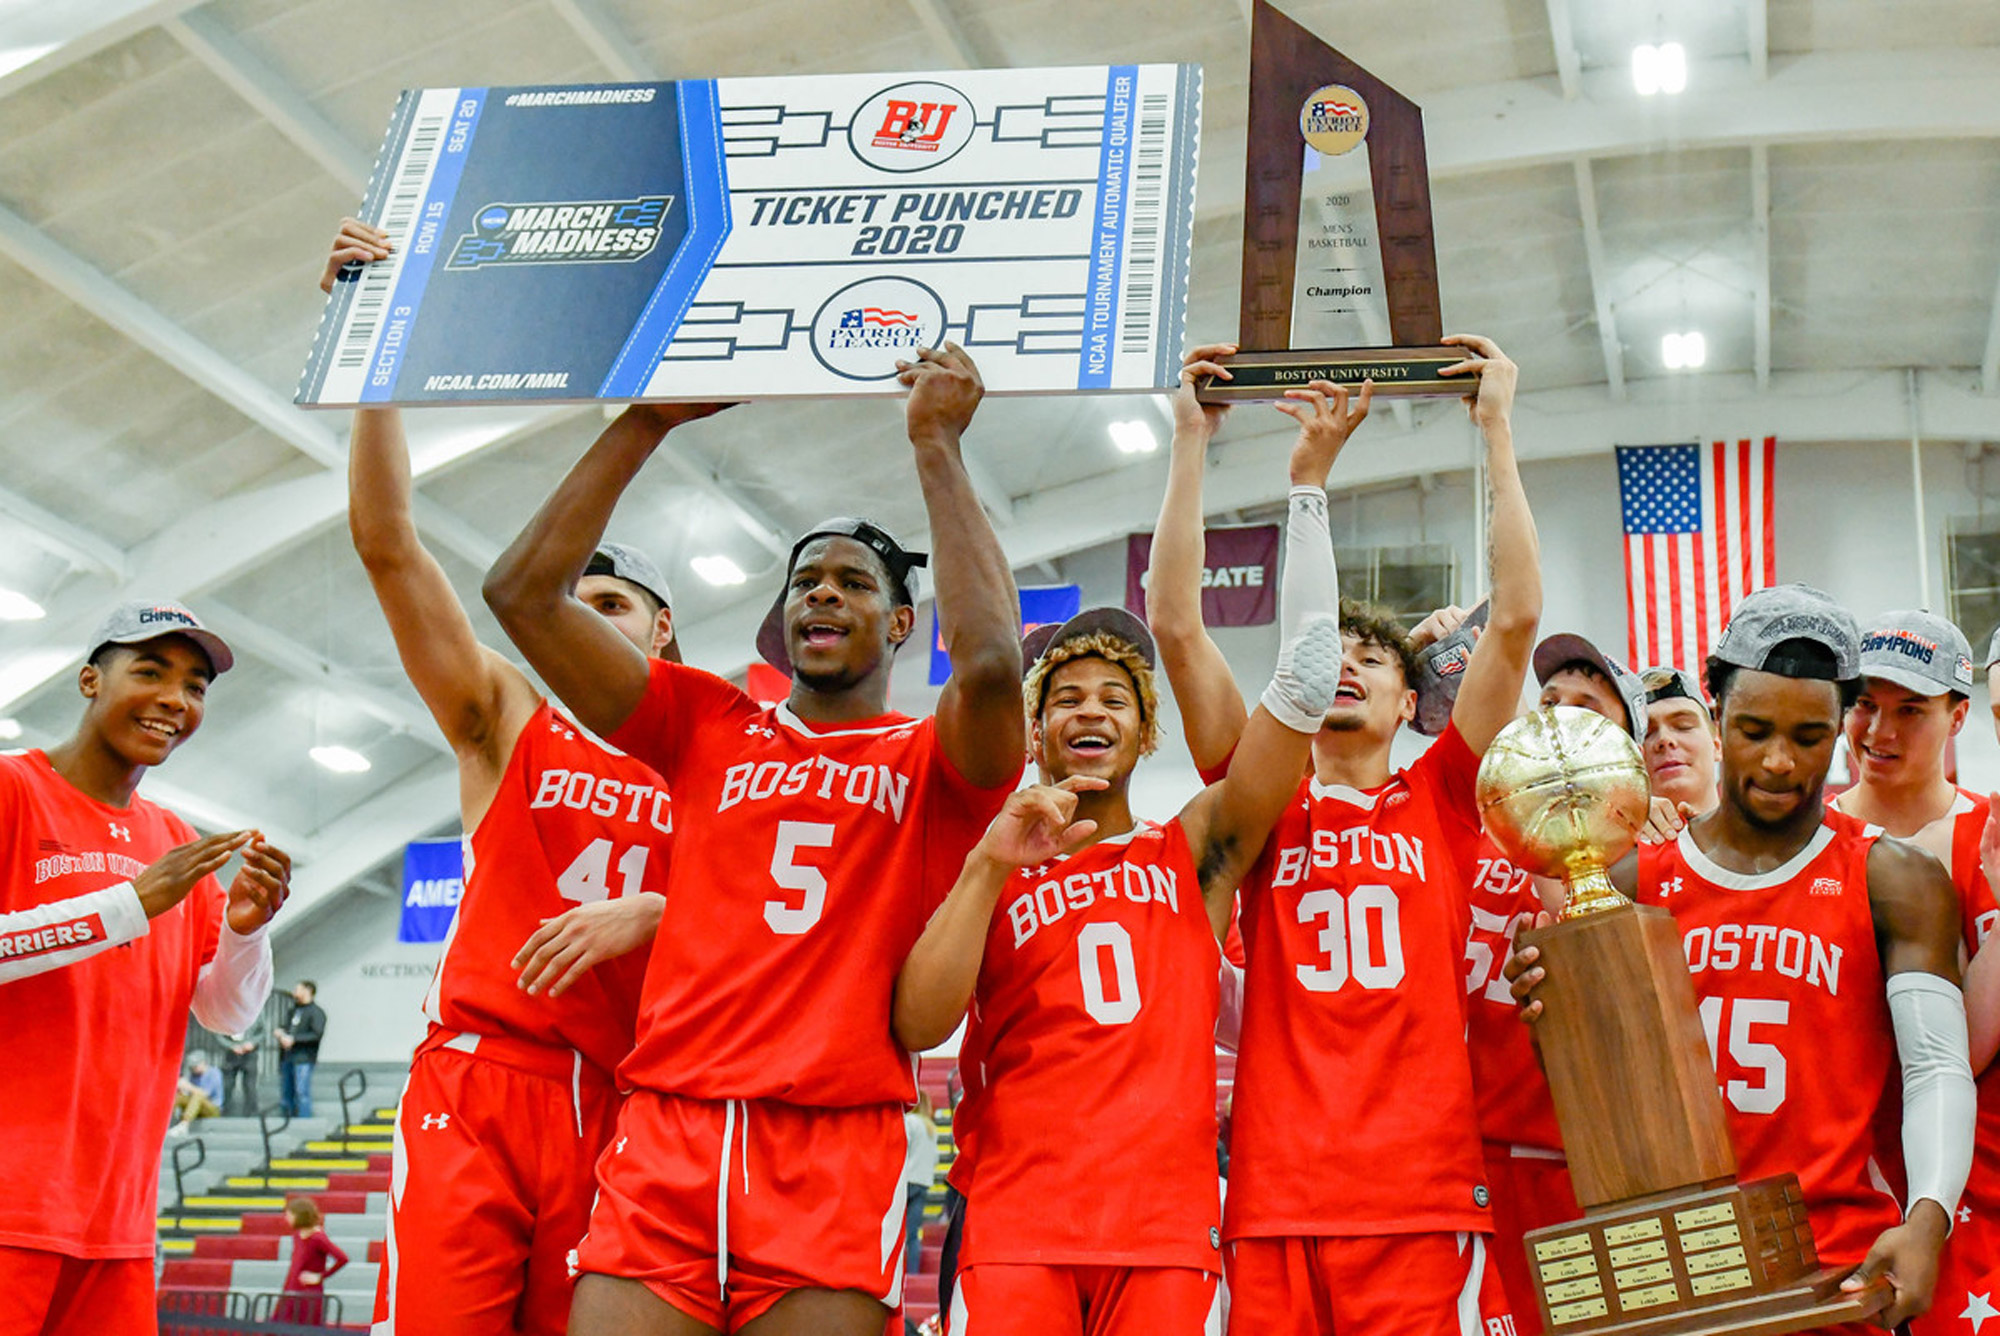 A photo of the BU Men's Basketball team after winning their first-ever Patriot League title last March